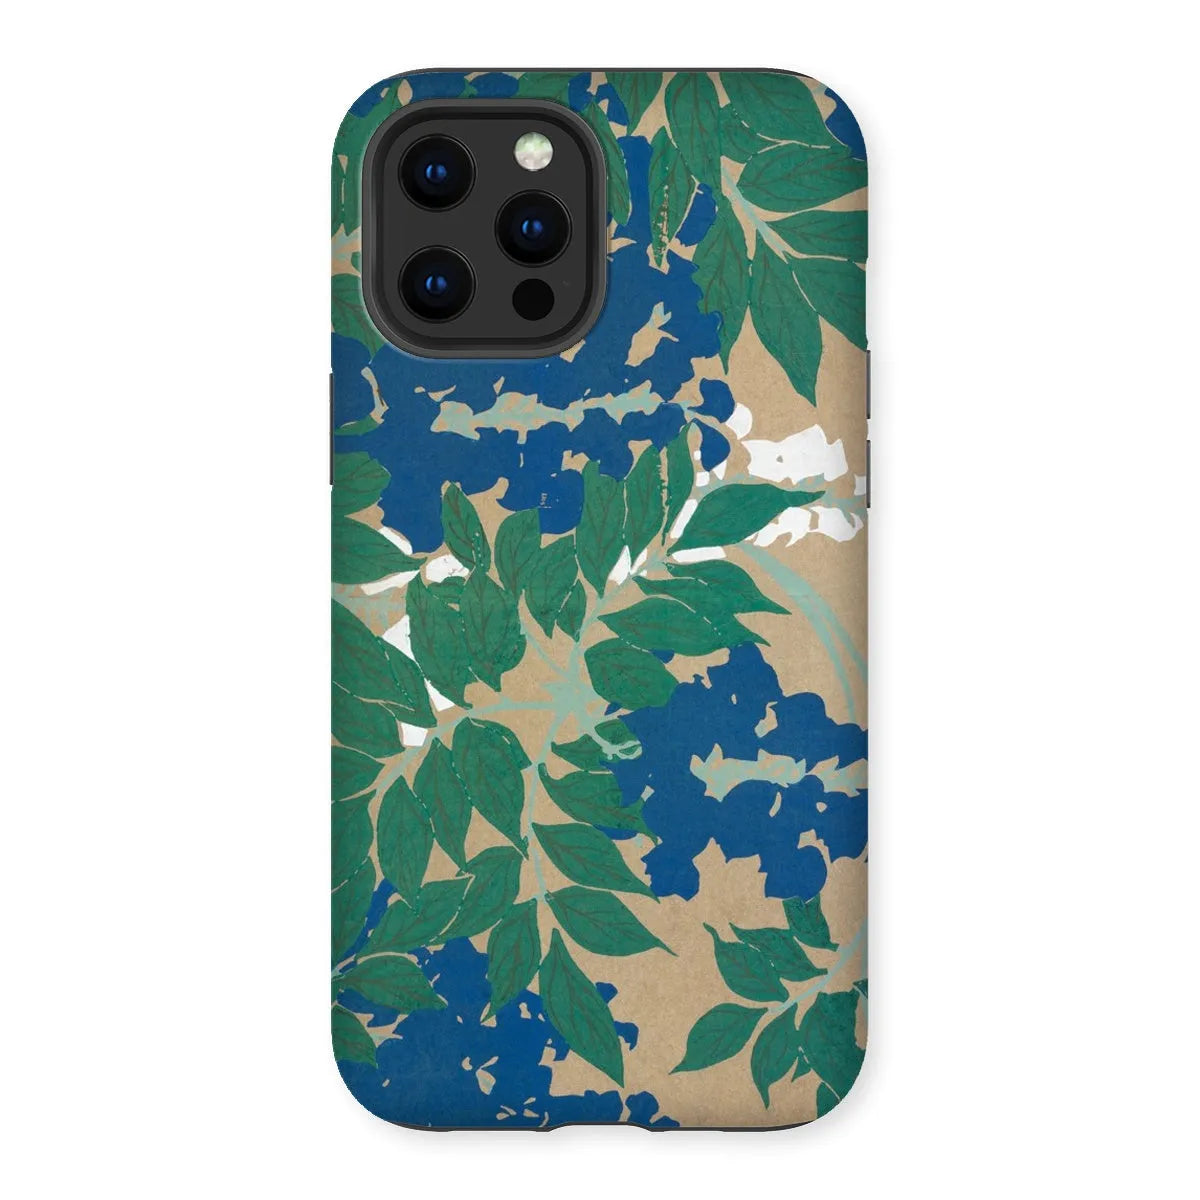 Wisteria From Momoyogusa - Floral Phone Case - Kamisaka Sekka - Iphone 12 Pro Max / Matte - Mobile Phone Cases